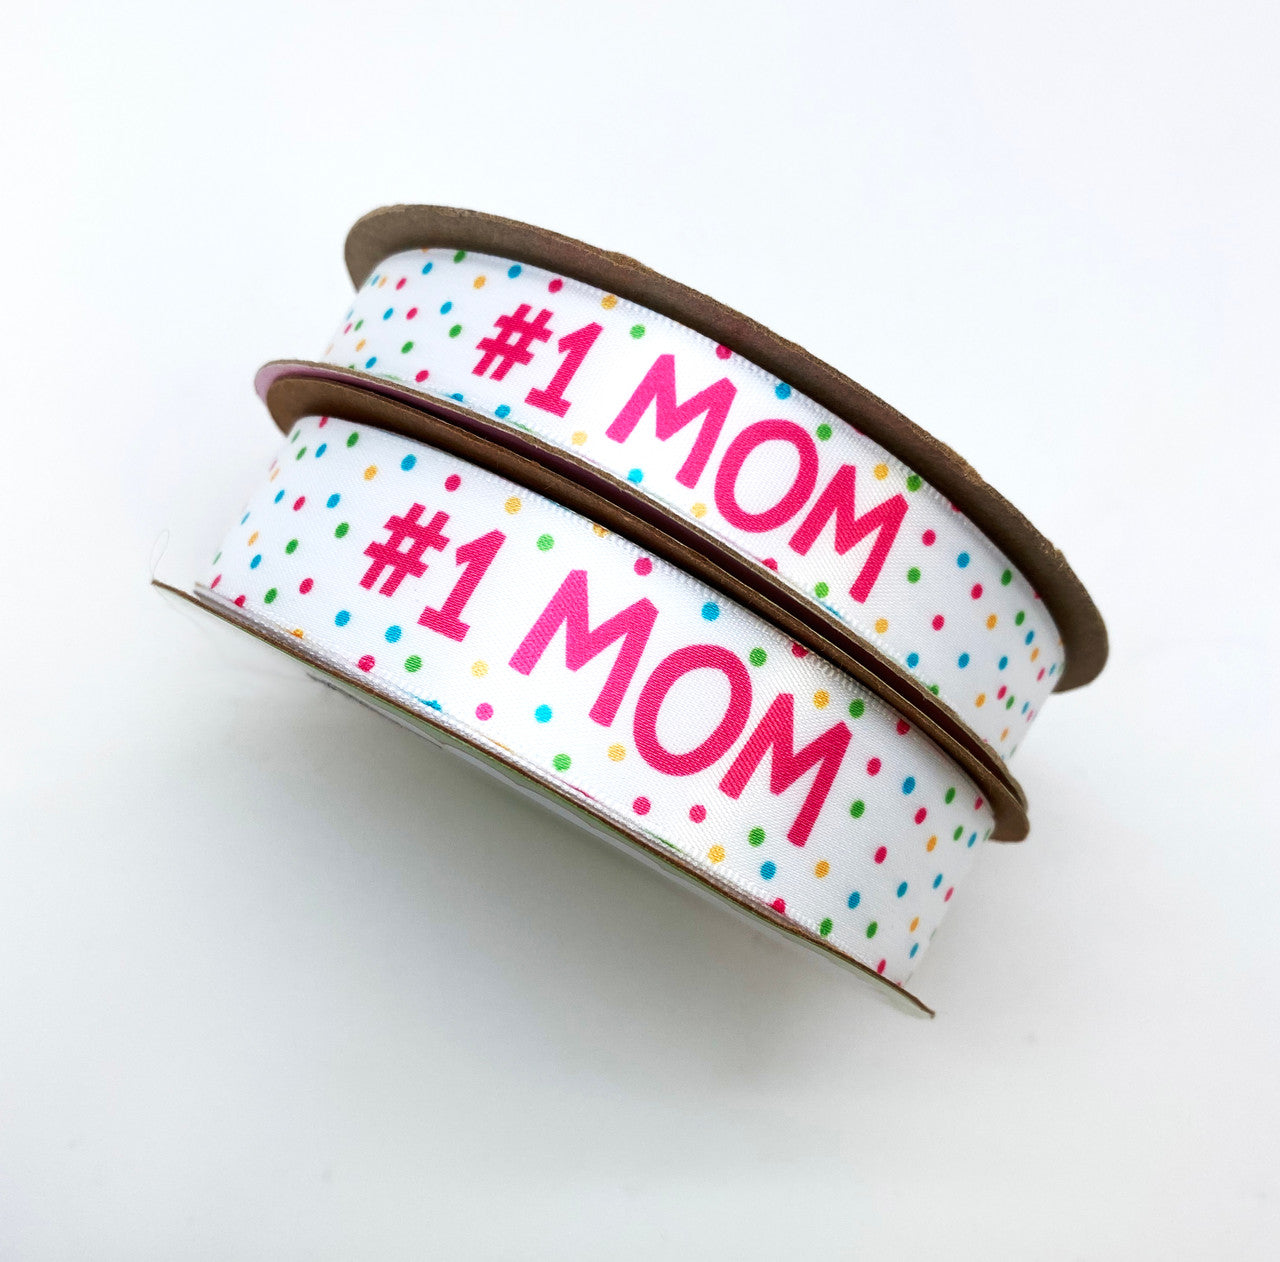 Tie a beautiful Mother's Day gift with our #1 Mom ribbon to make your gift pop!